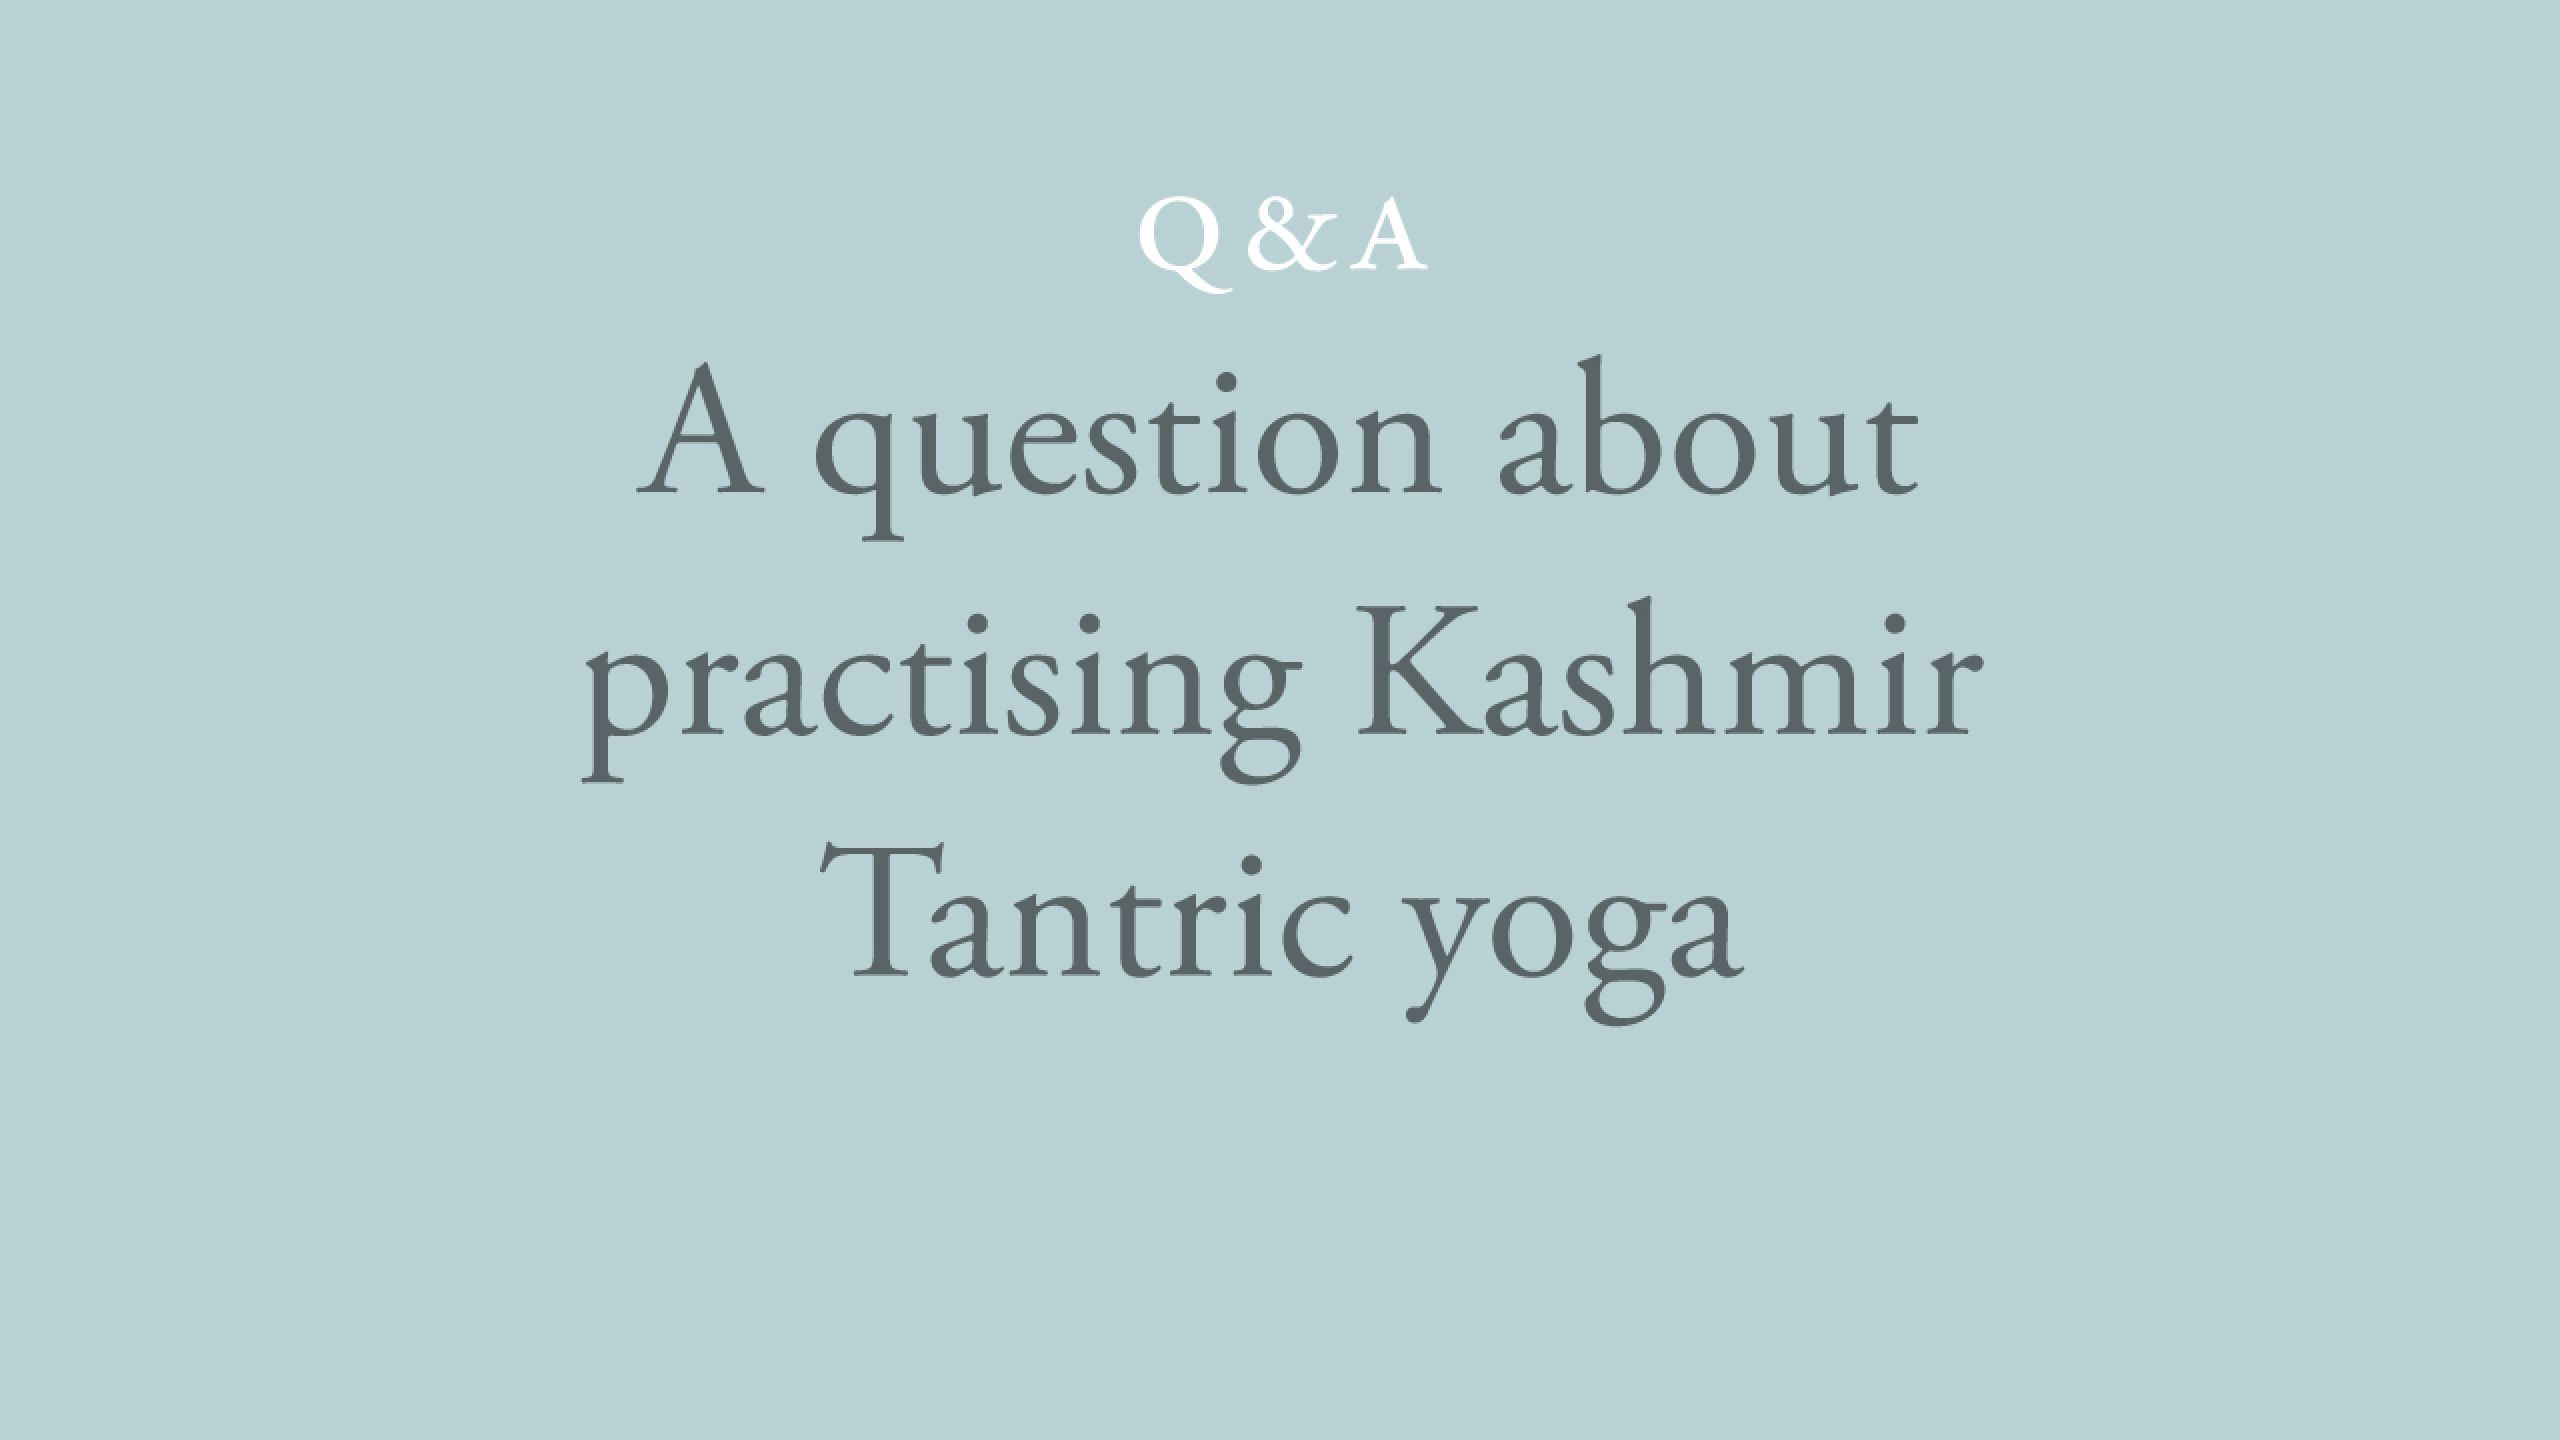 Is it necessary to practice Kashmir Tantric yoga on a daily basis?